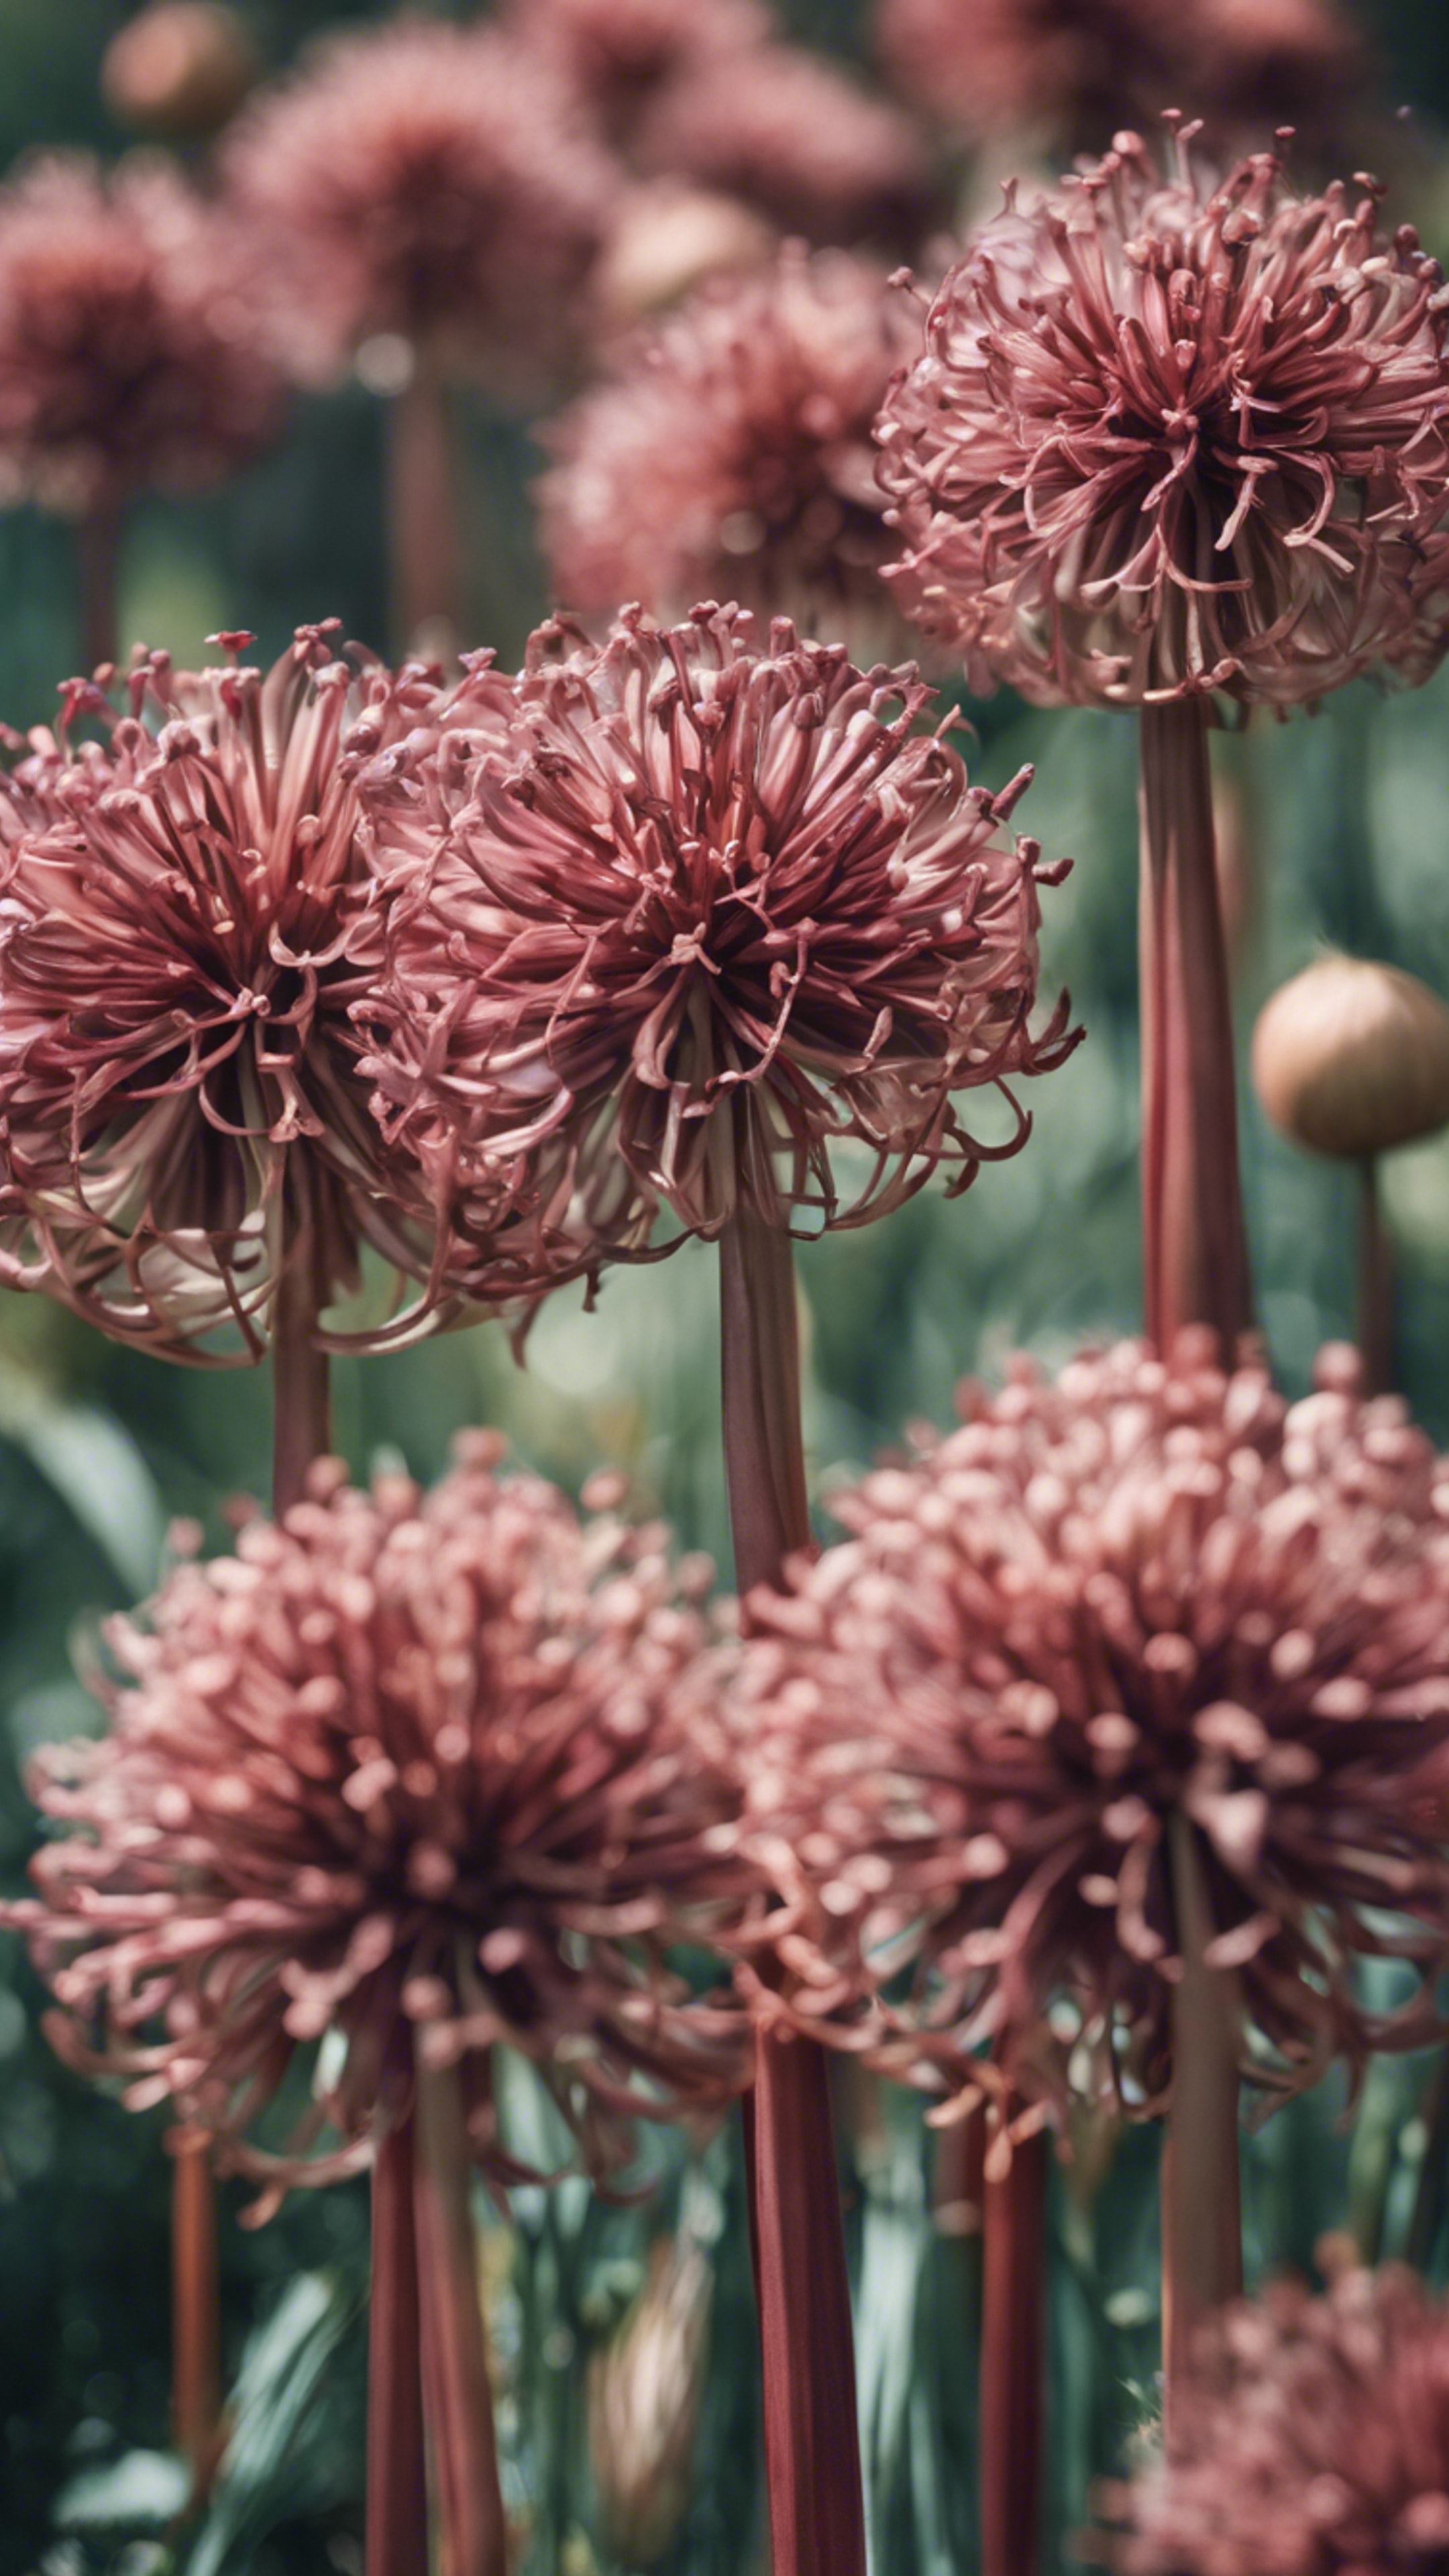 Immerse in nature with a valiant, organic motif of red-washed and brown alliums, harmoniously repeating. Tapet[b1ade6bf63d74276ba8b]